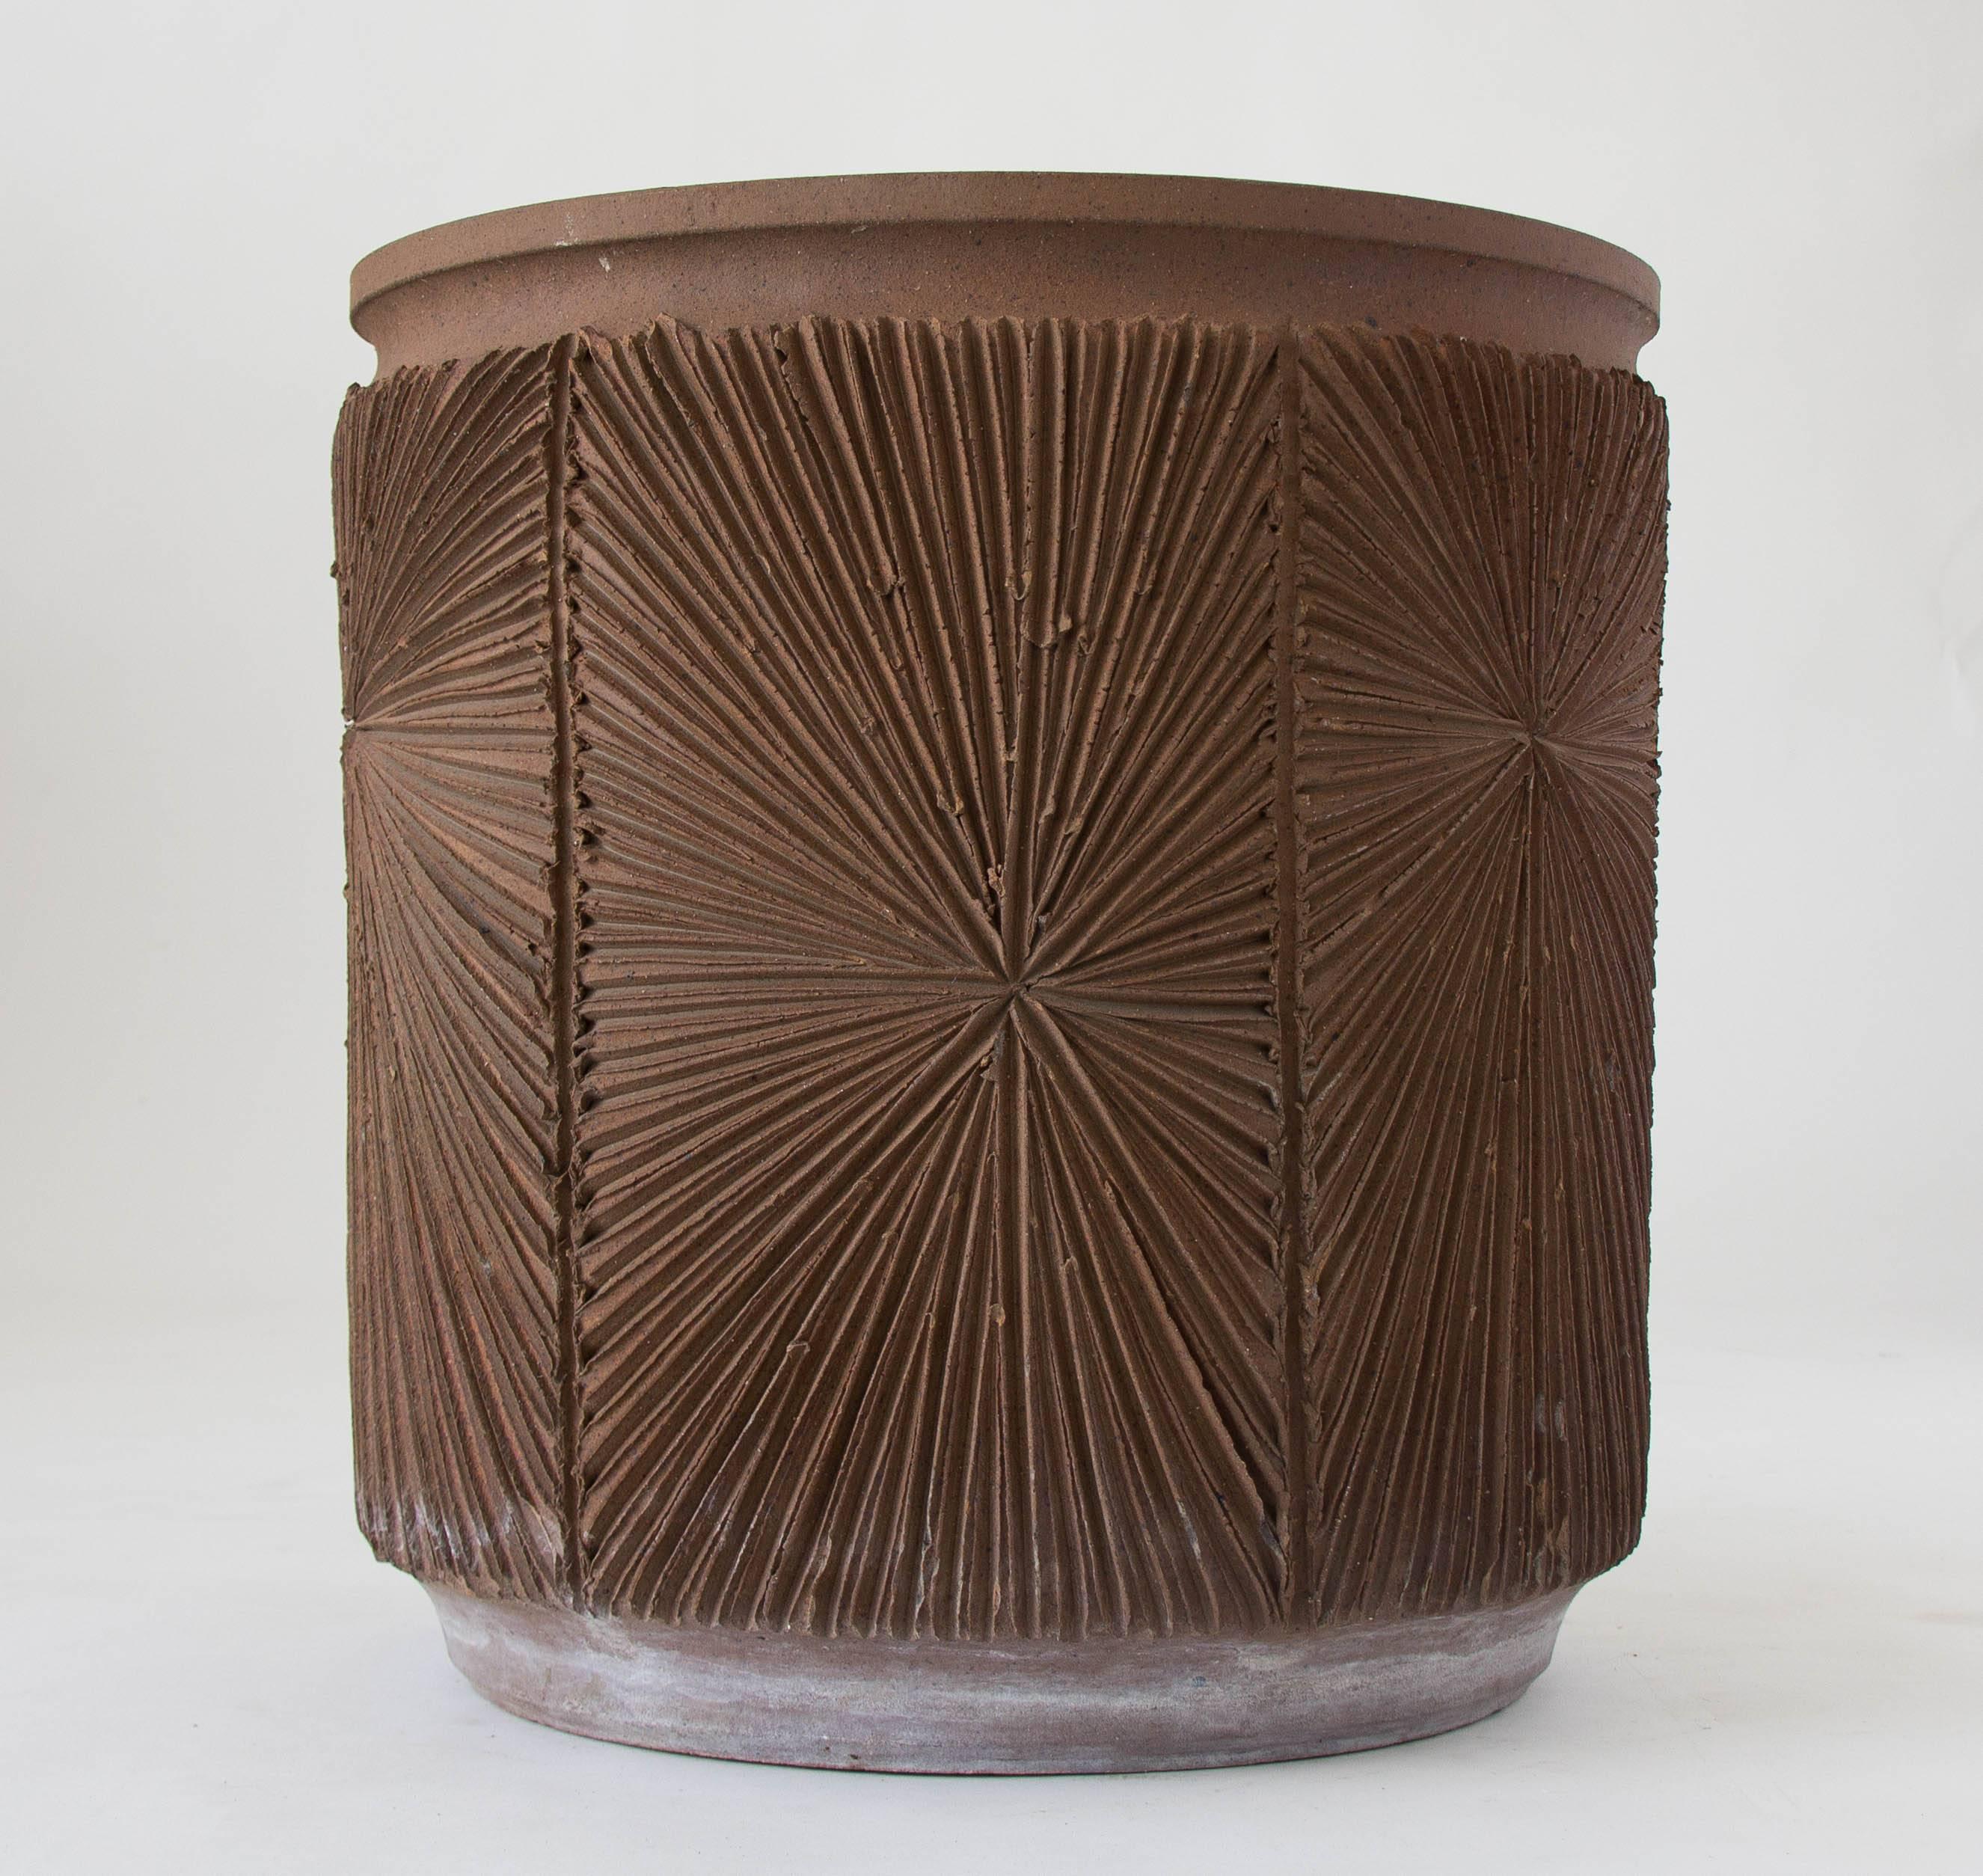 A tall stoneware planter from Robert Maxwell 1970s collaboration Earthgender. The planter has a rounded lip and an incised all-over sunburst pattern and is unglazed. We have an additional planter available in this size with a glazed interior.